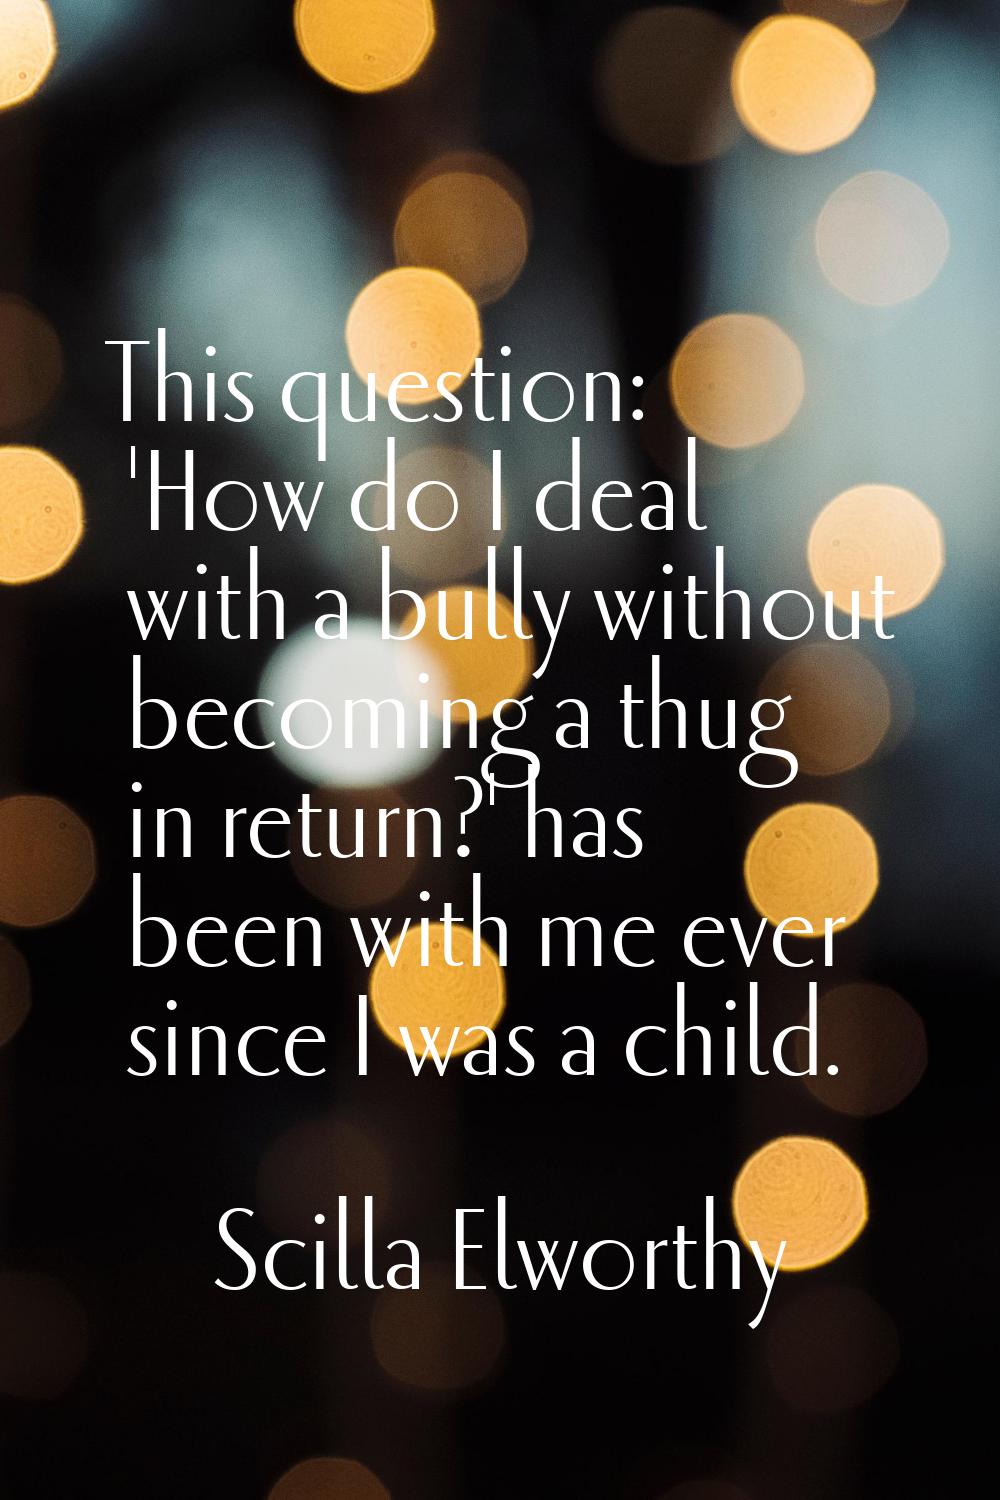 This question: 'How do I deal with a bully without becoming a thug in return?' has been with me eve